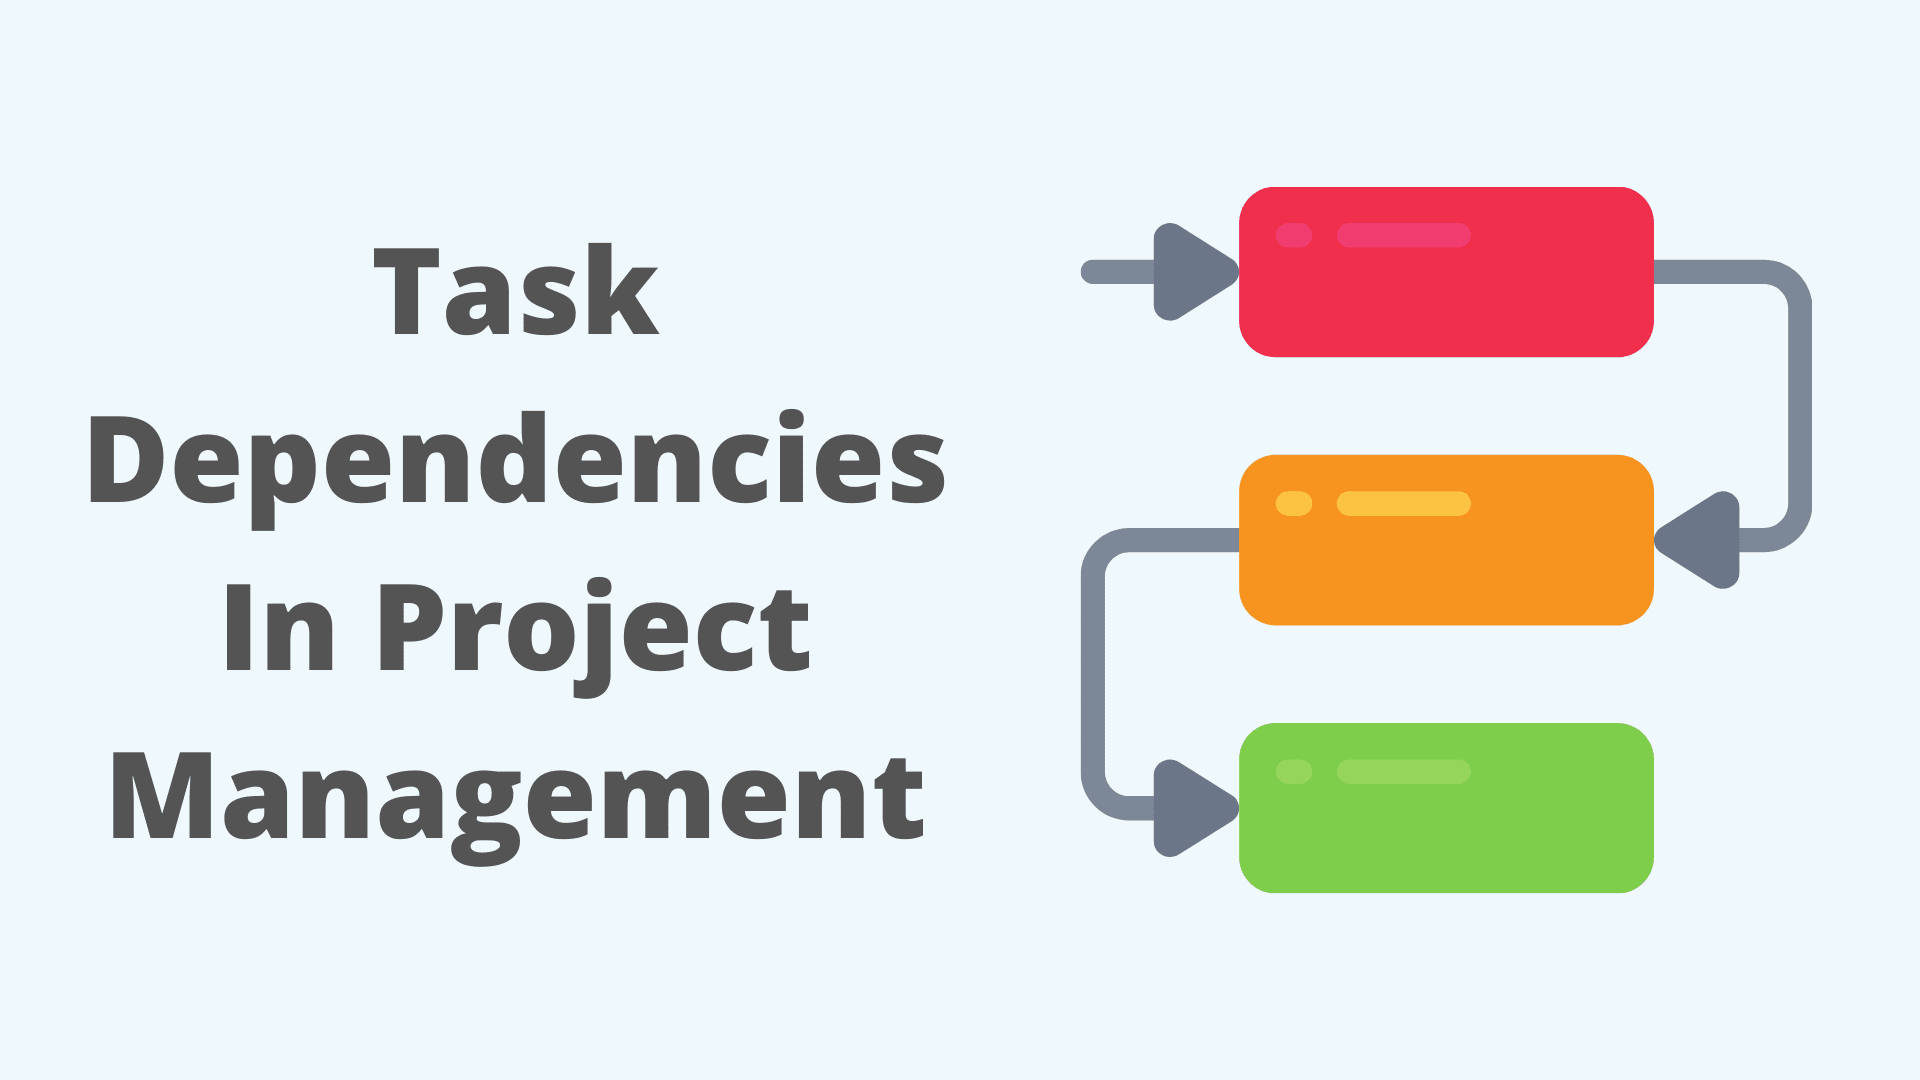 Task Dependencies In Project Management